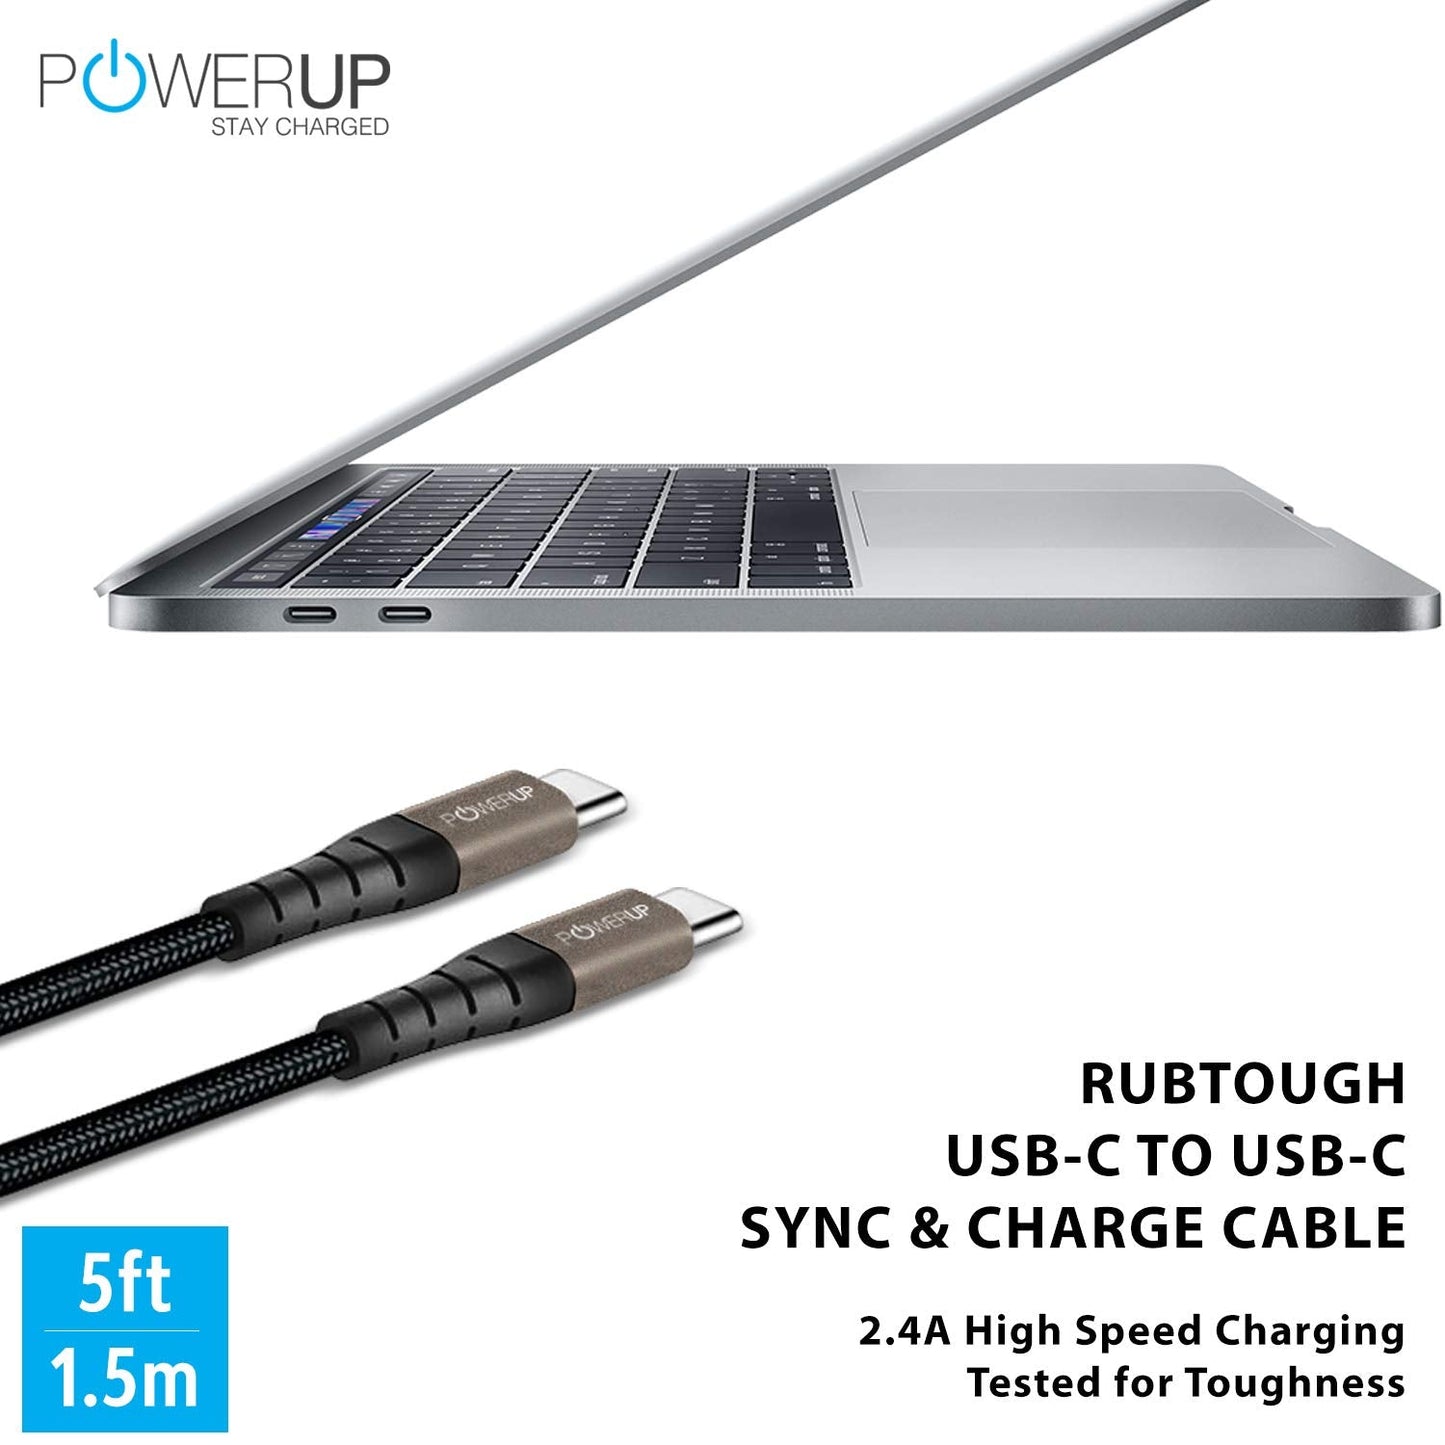 Powerup Usb-c To Usb-c Charging & Sync Cable With 1 Years Warranty - Black